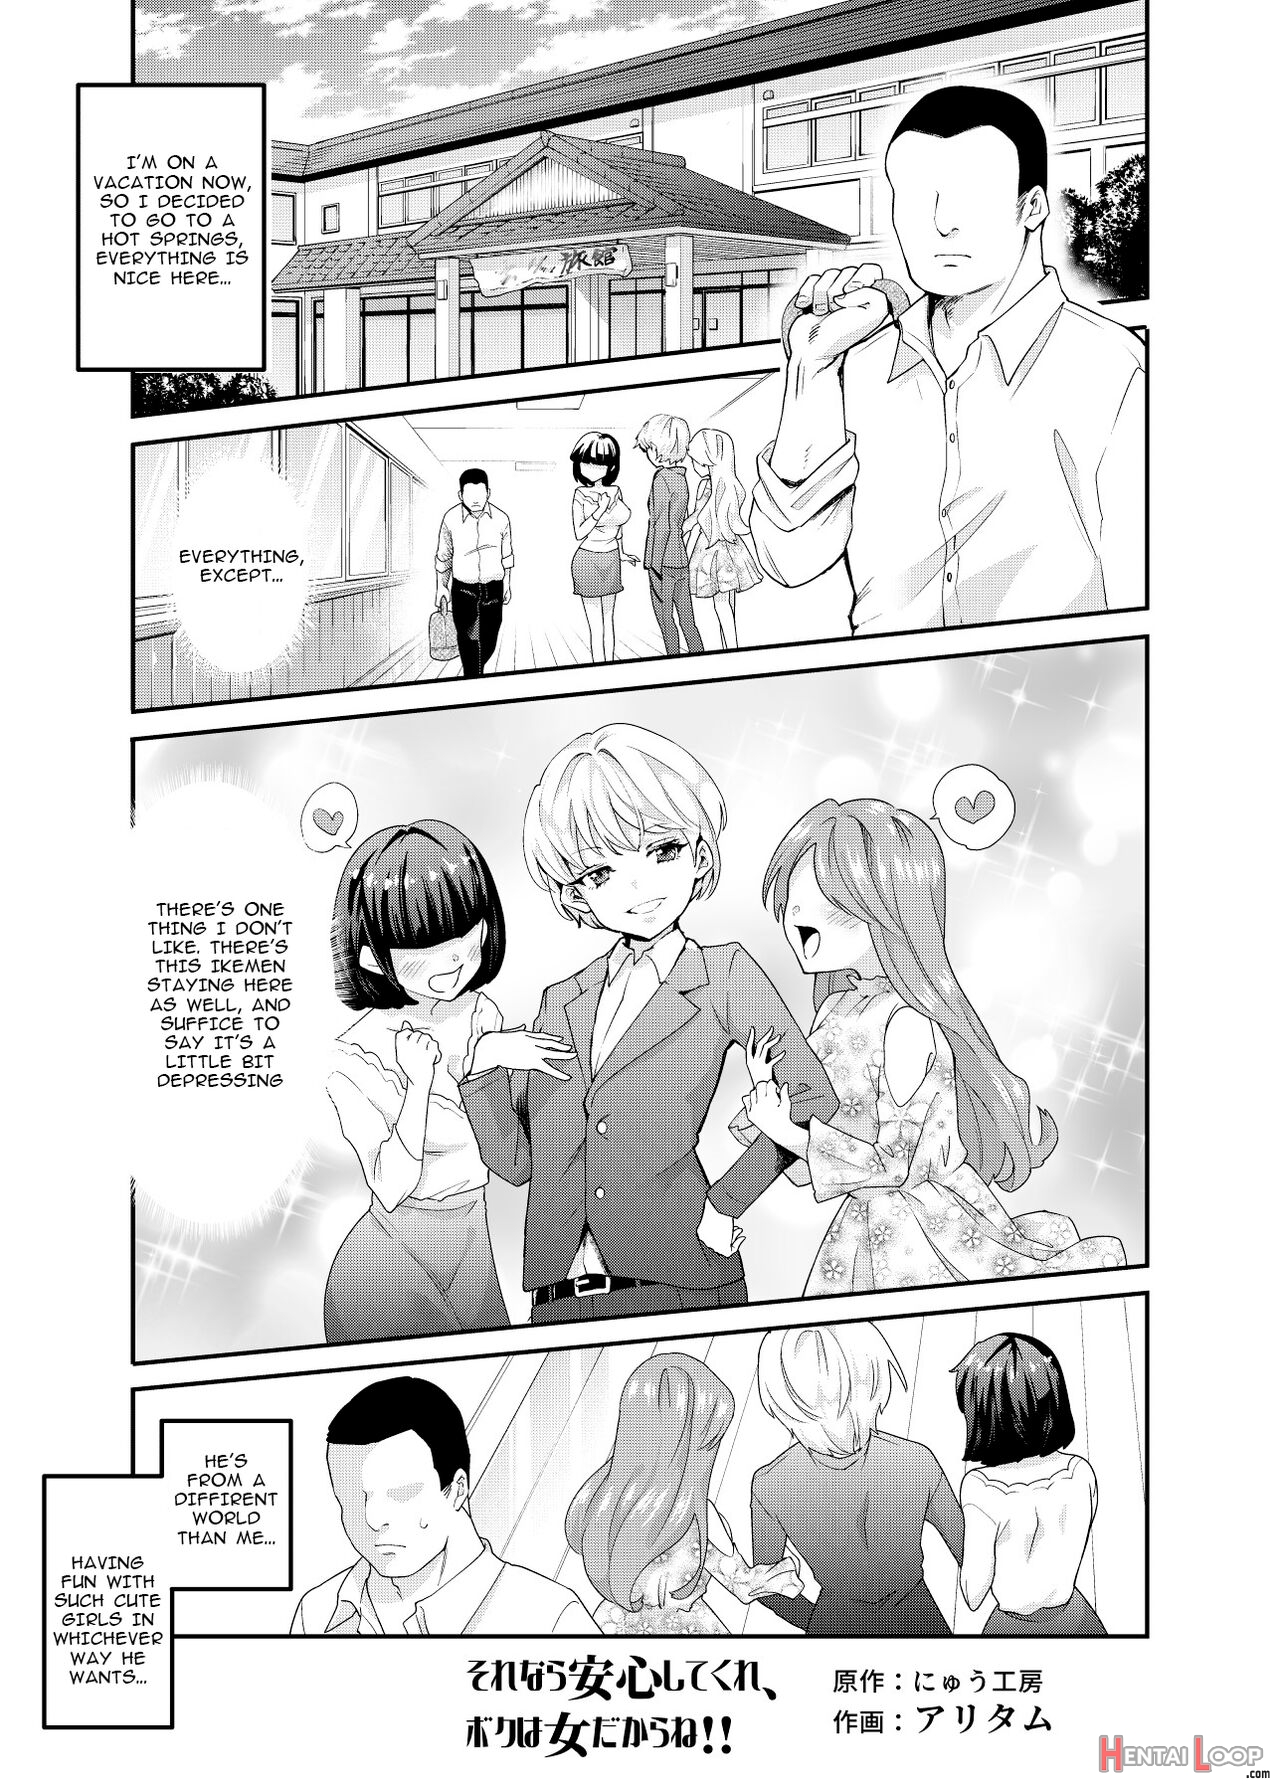 Then You Shouldn't Worry, Because I'm A Girl! Ex! page 2